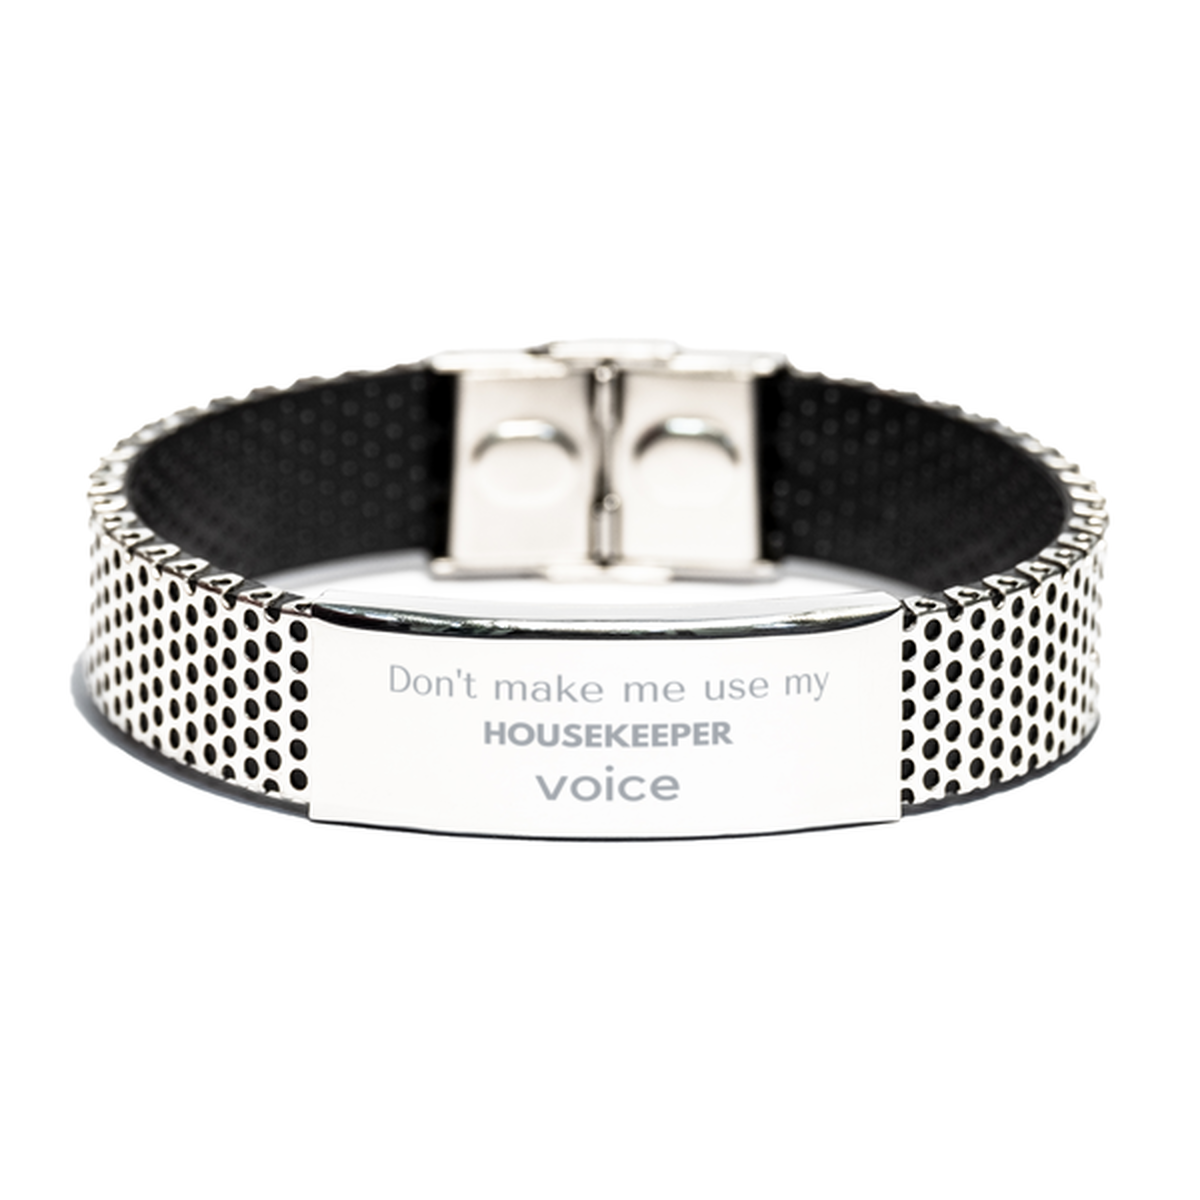 Don't make me use my Housekeeper voice, Sarcasm Housekeeper Gifts, Christmas Housekeeper Stainless Steel Bracelet Birthday Unique Gifts For Housekeeper Coworkers, Men, Women, Colleague, Friends